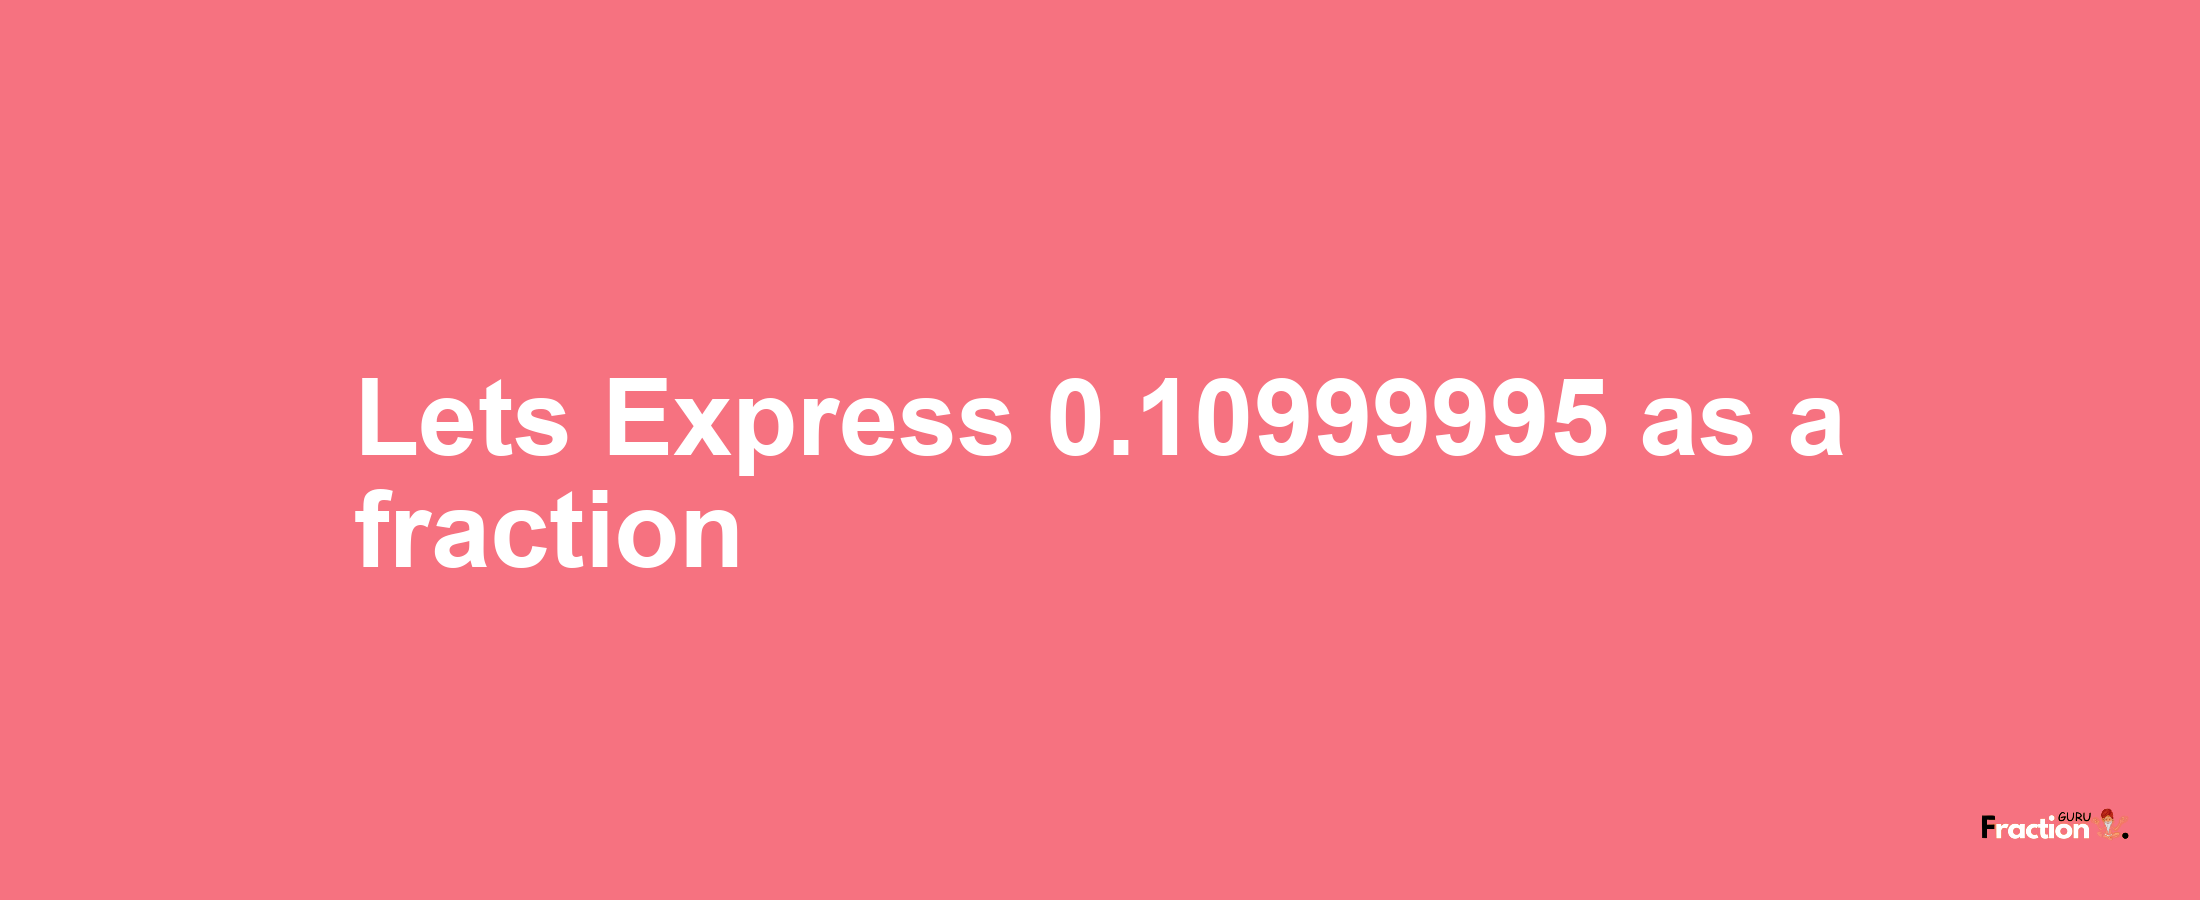 Lets Express 0.10999995 as afraction